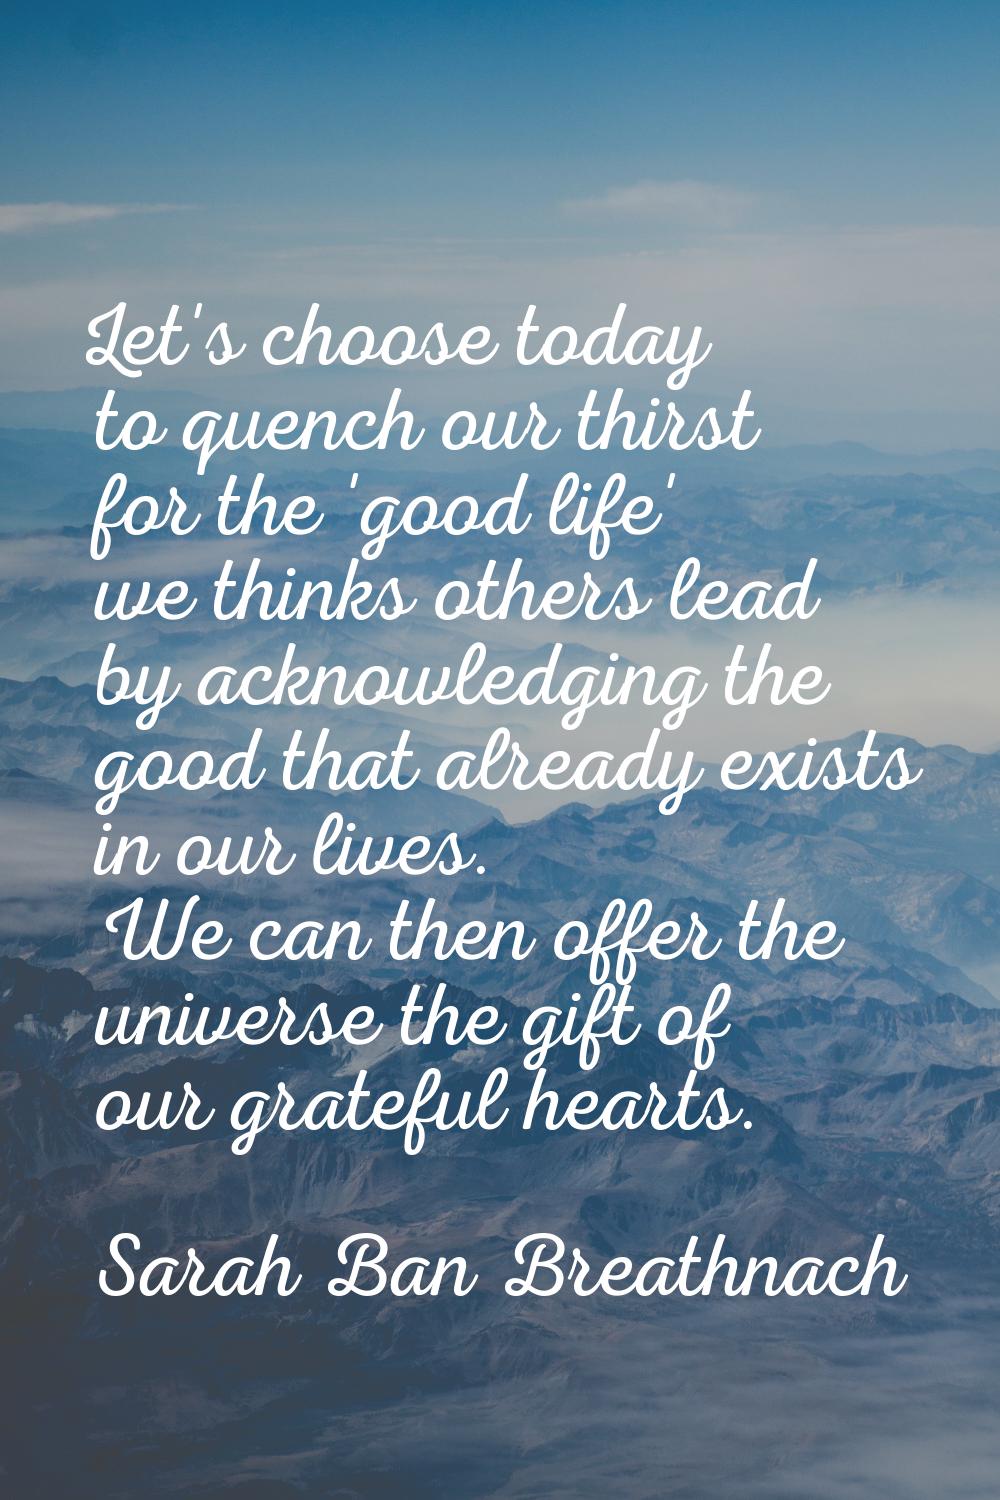 Let's choose today to quench our thirst for the 'good life' we thinks others lead by acknowledging 